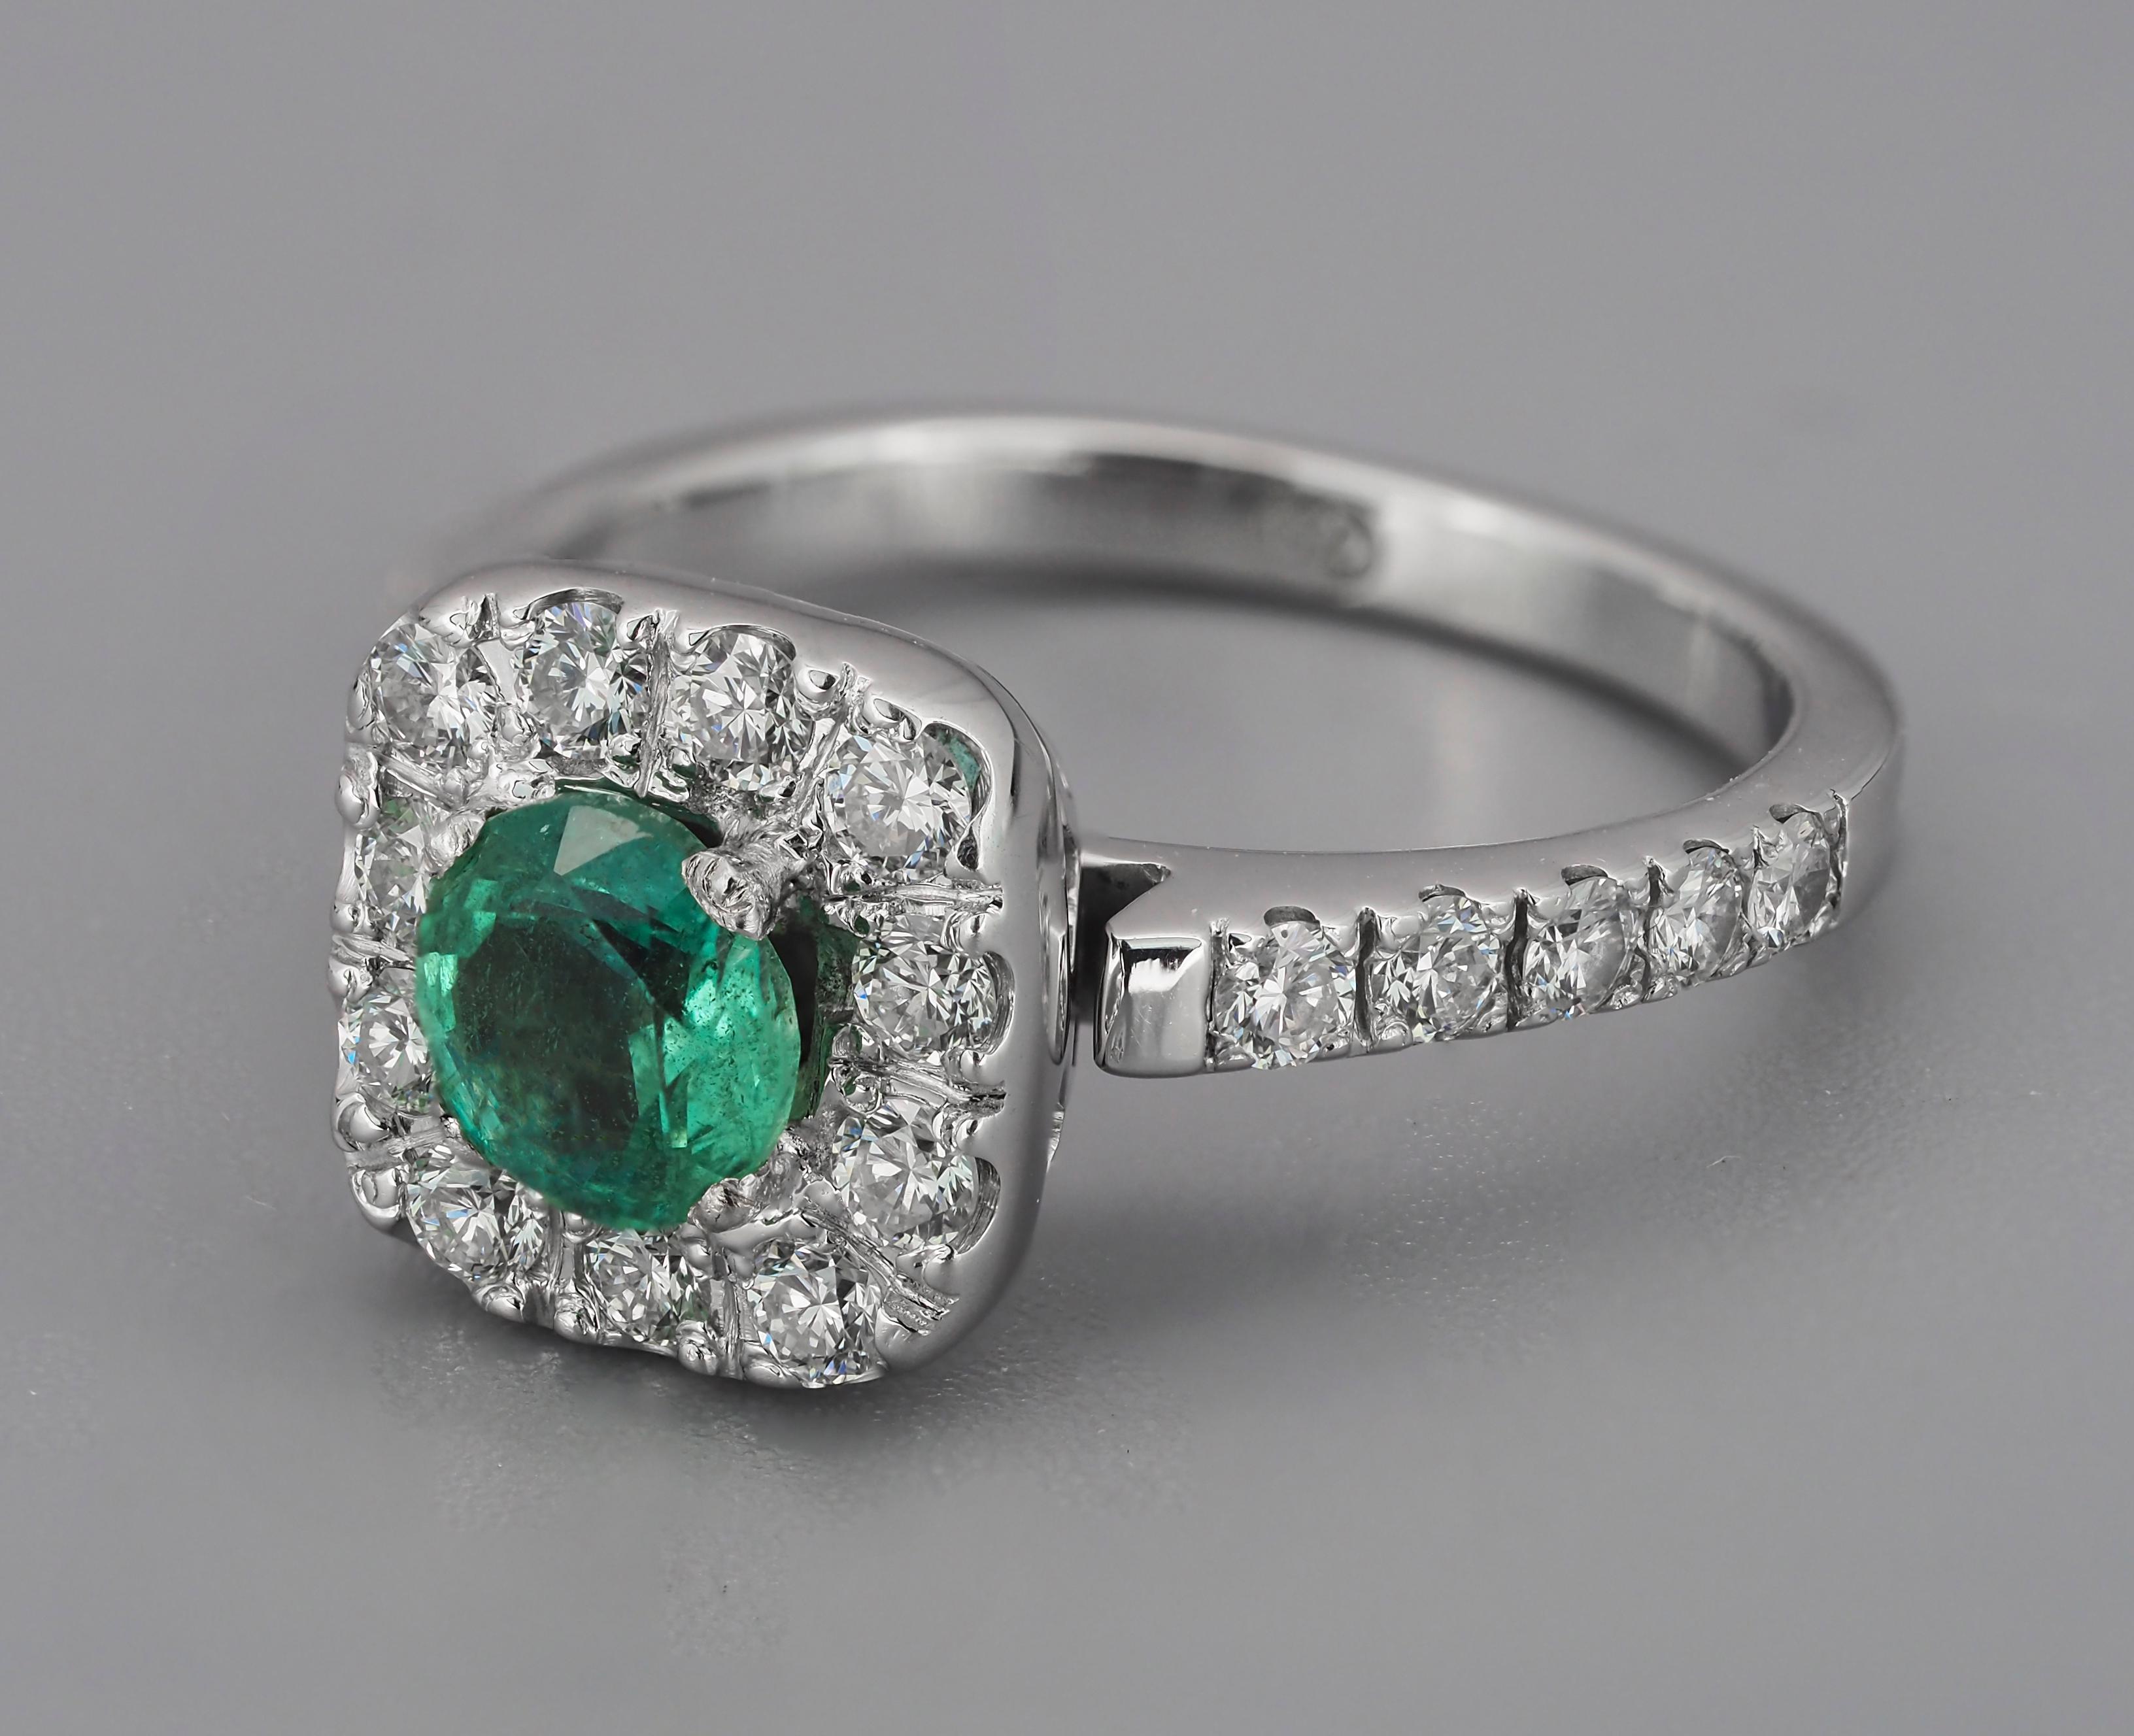 For Sale:  Emerald and Diamonds 14k Gold Ring, Vintage Style Emerald and Diamonds Ring